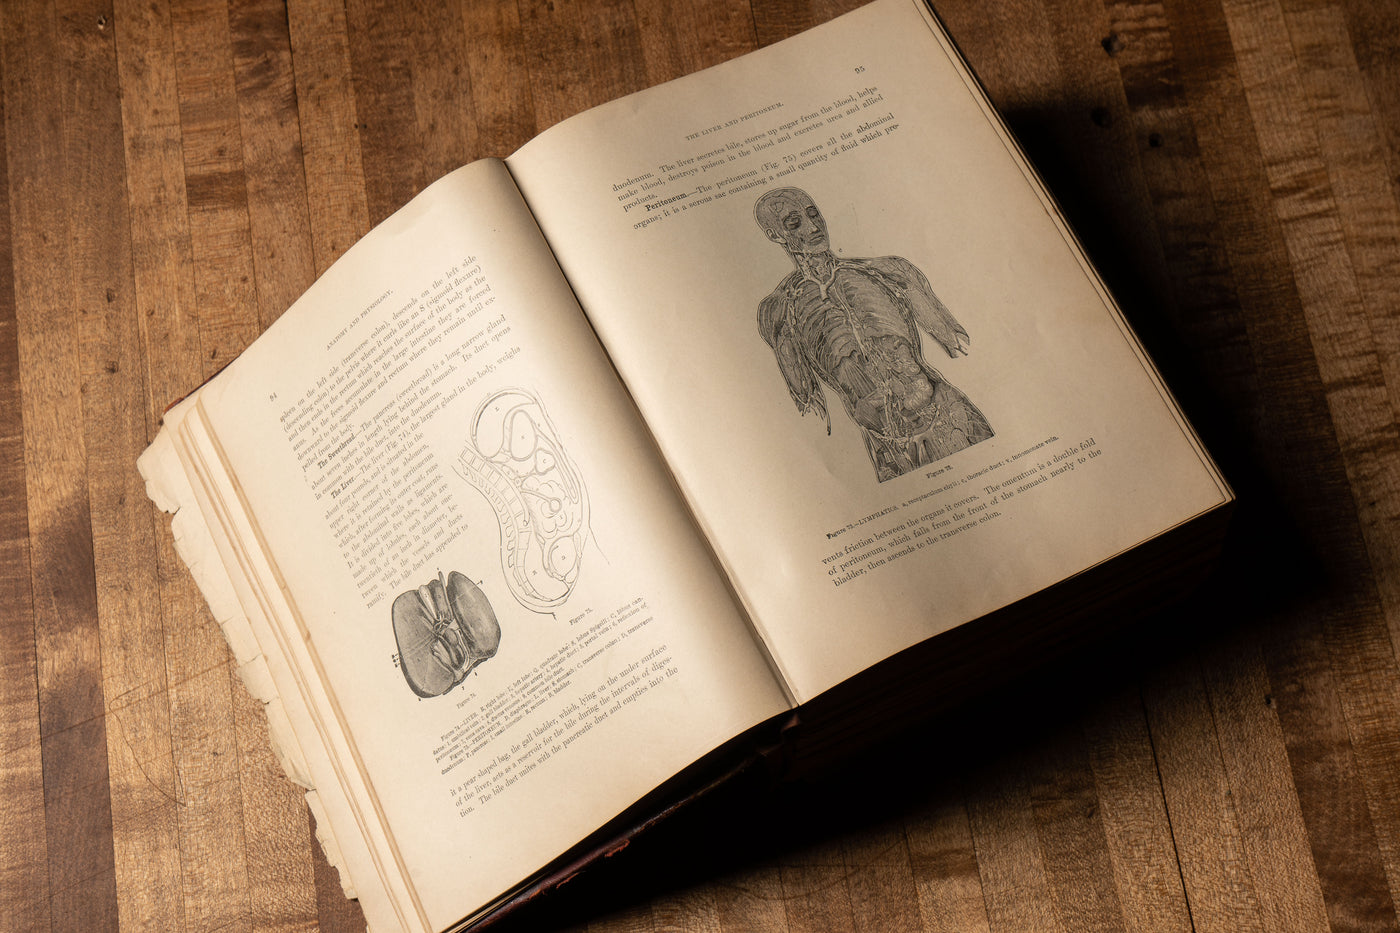 1901 Edition of Medicology, or Home Encyclopedia of Health